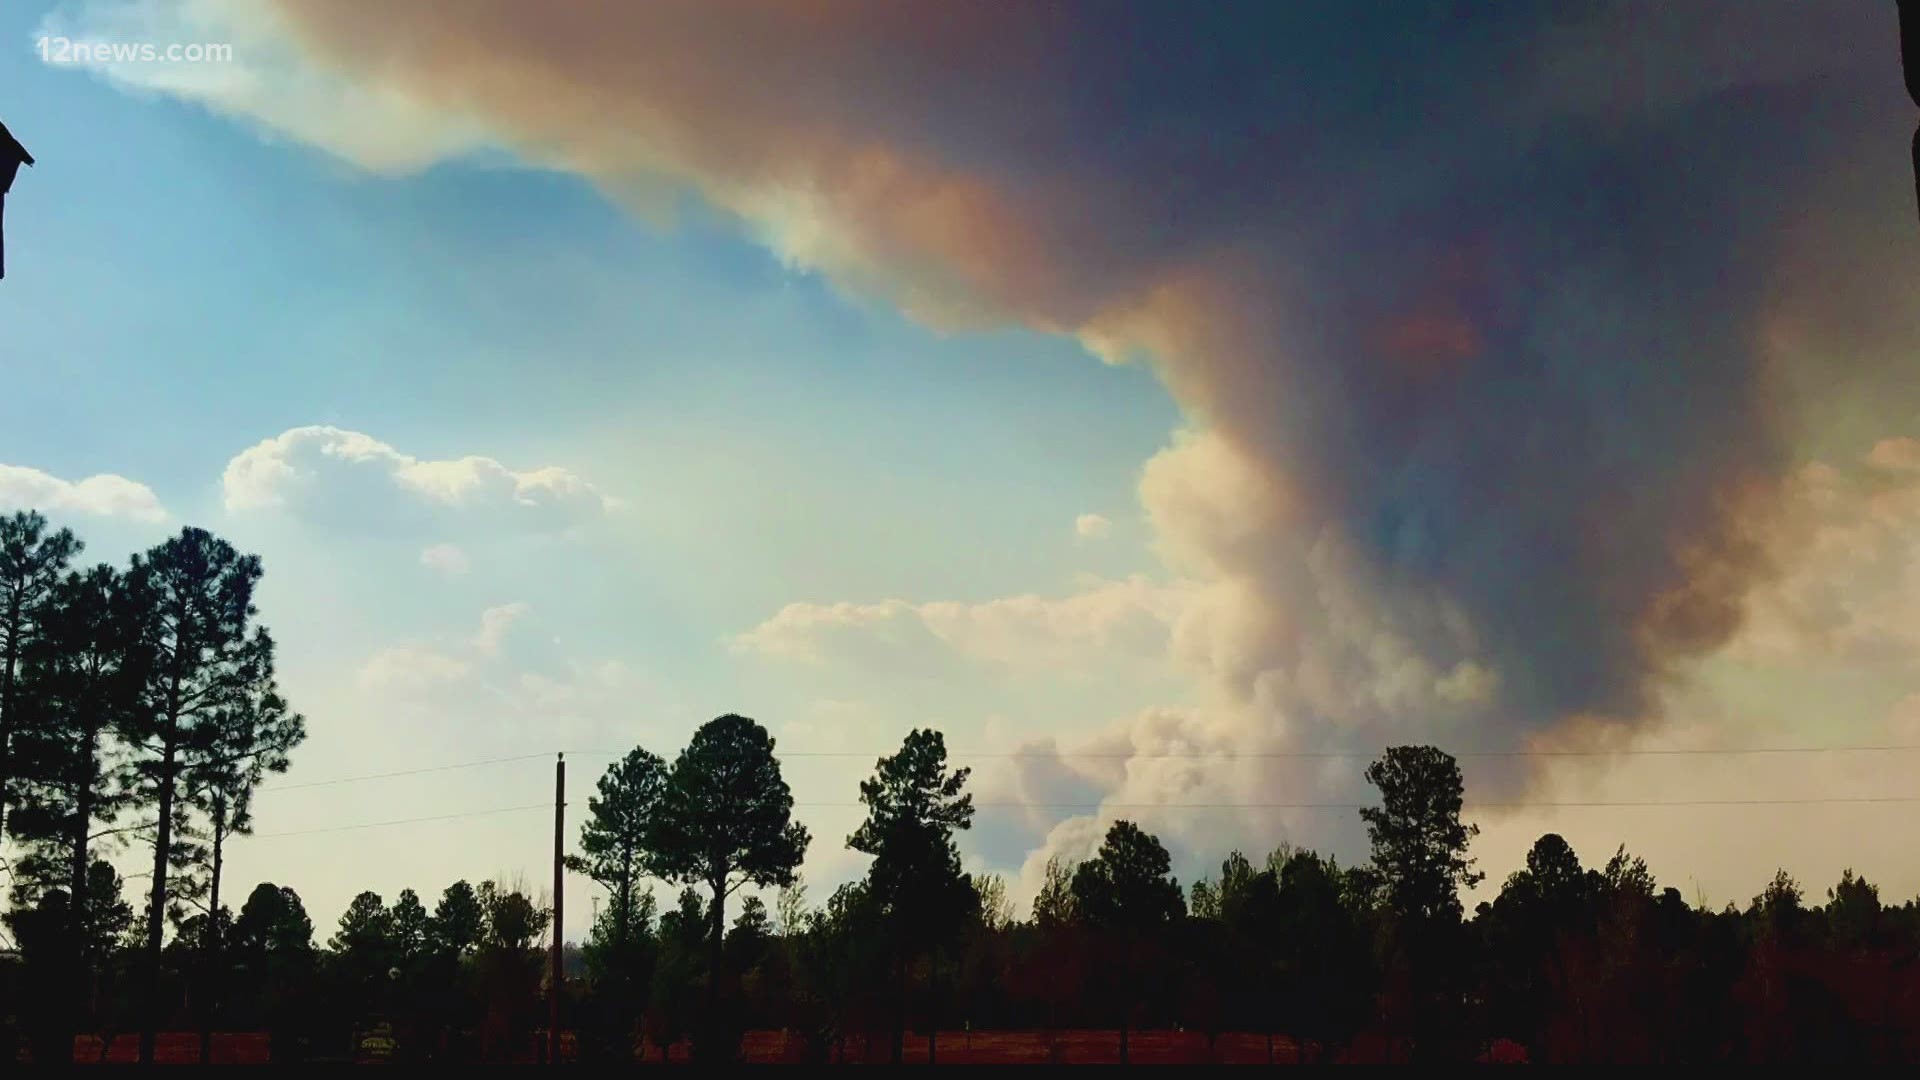 There are several wildfires burning across Arizona. Here are the latest updates on firefighting efforts on June 22, 2021.